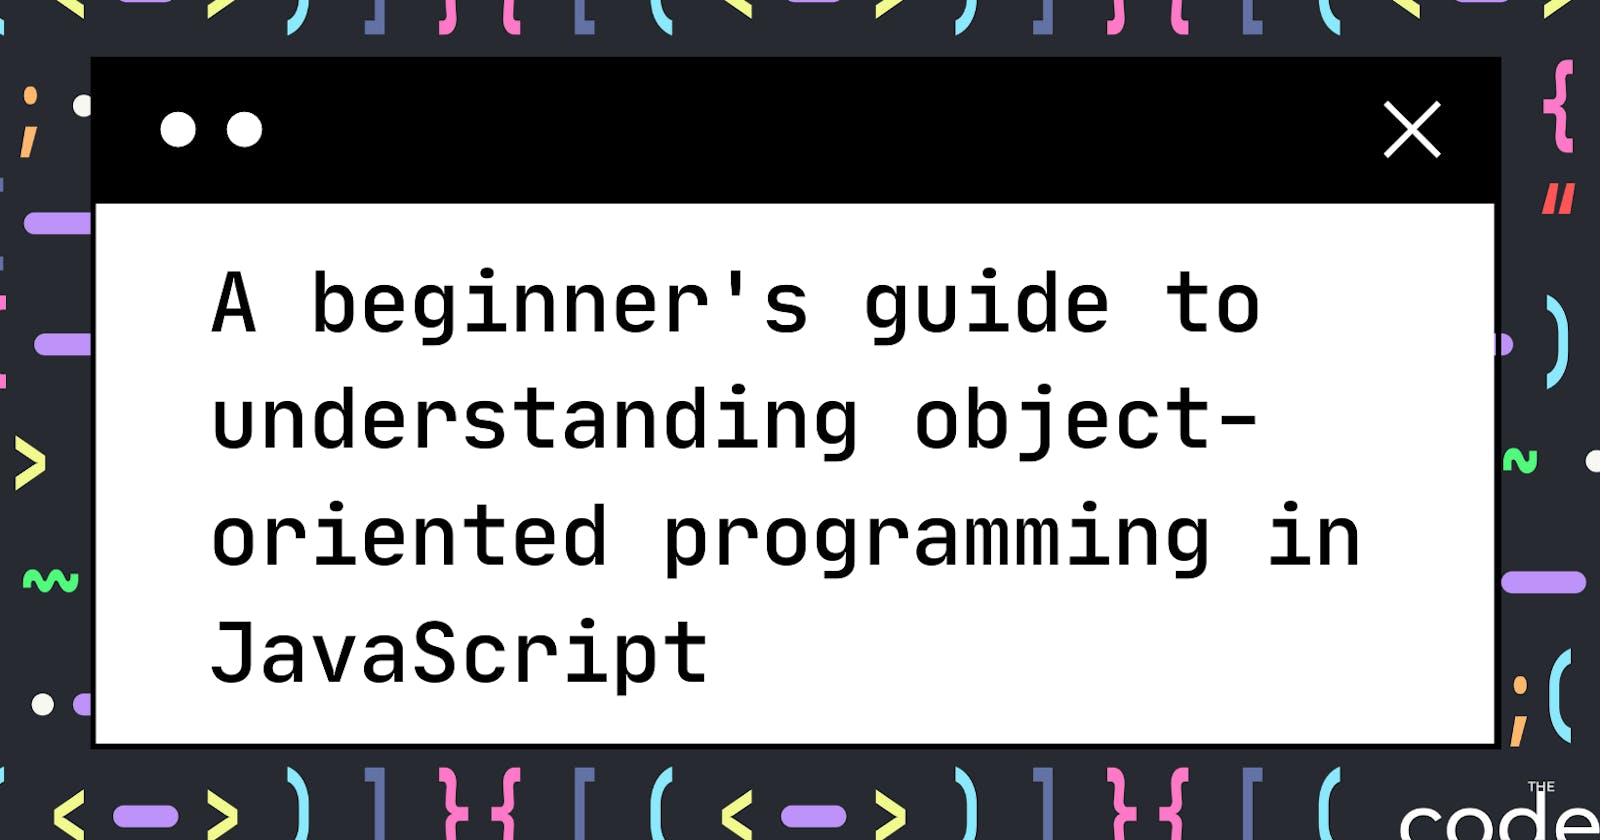 A beginner's guide to understanding object-oriented programming in JavaScript